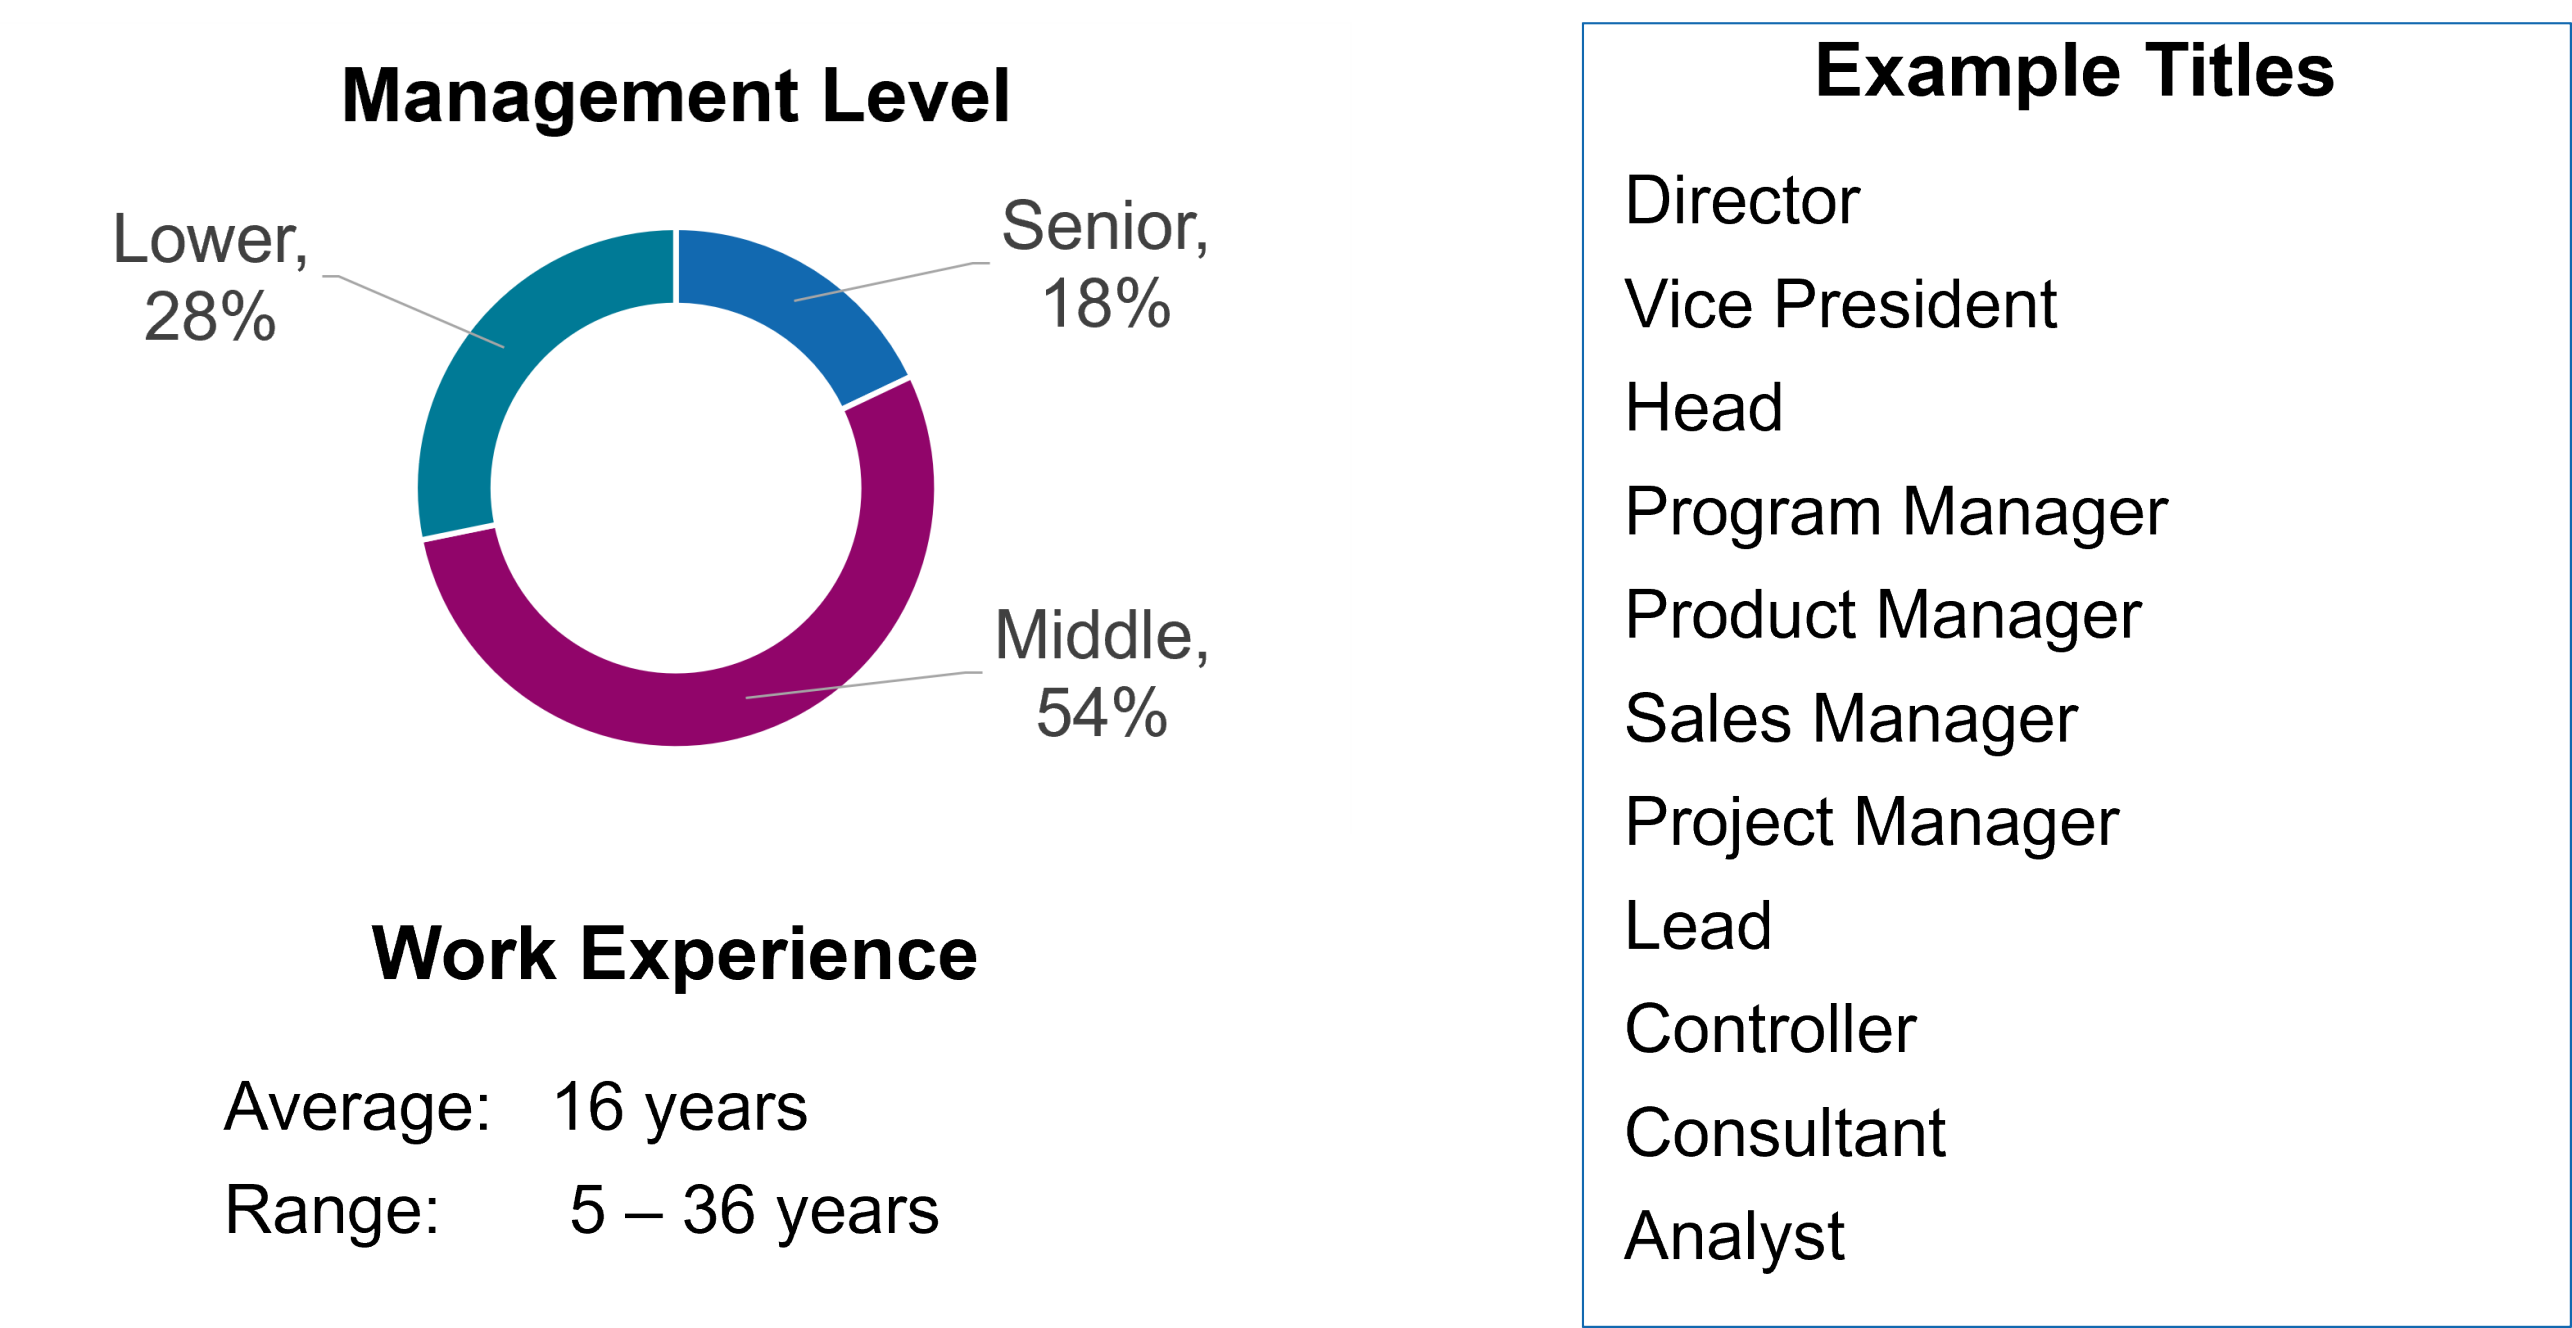 Figure showing information about the 2024 CAS AIS participants, including management level (middle management 54%, lower 28%, senior 18%), average work experience of 16 years, and typical job titles ranging from Analyst to Director